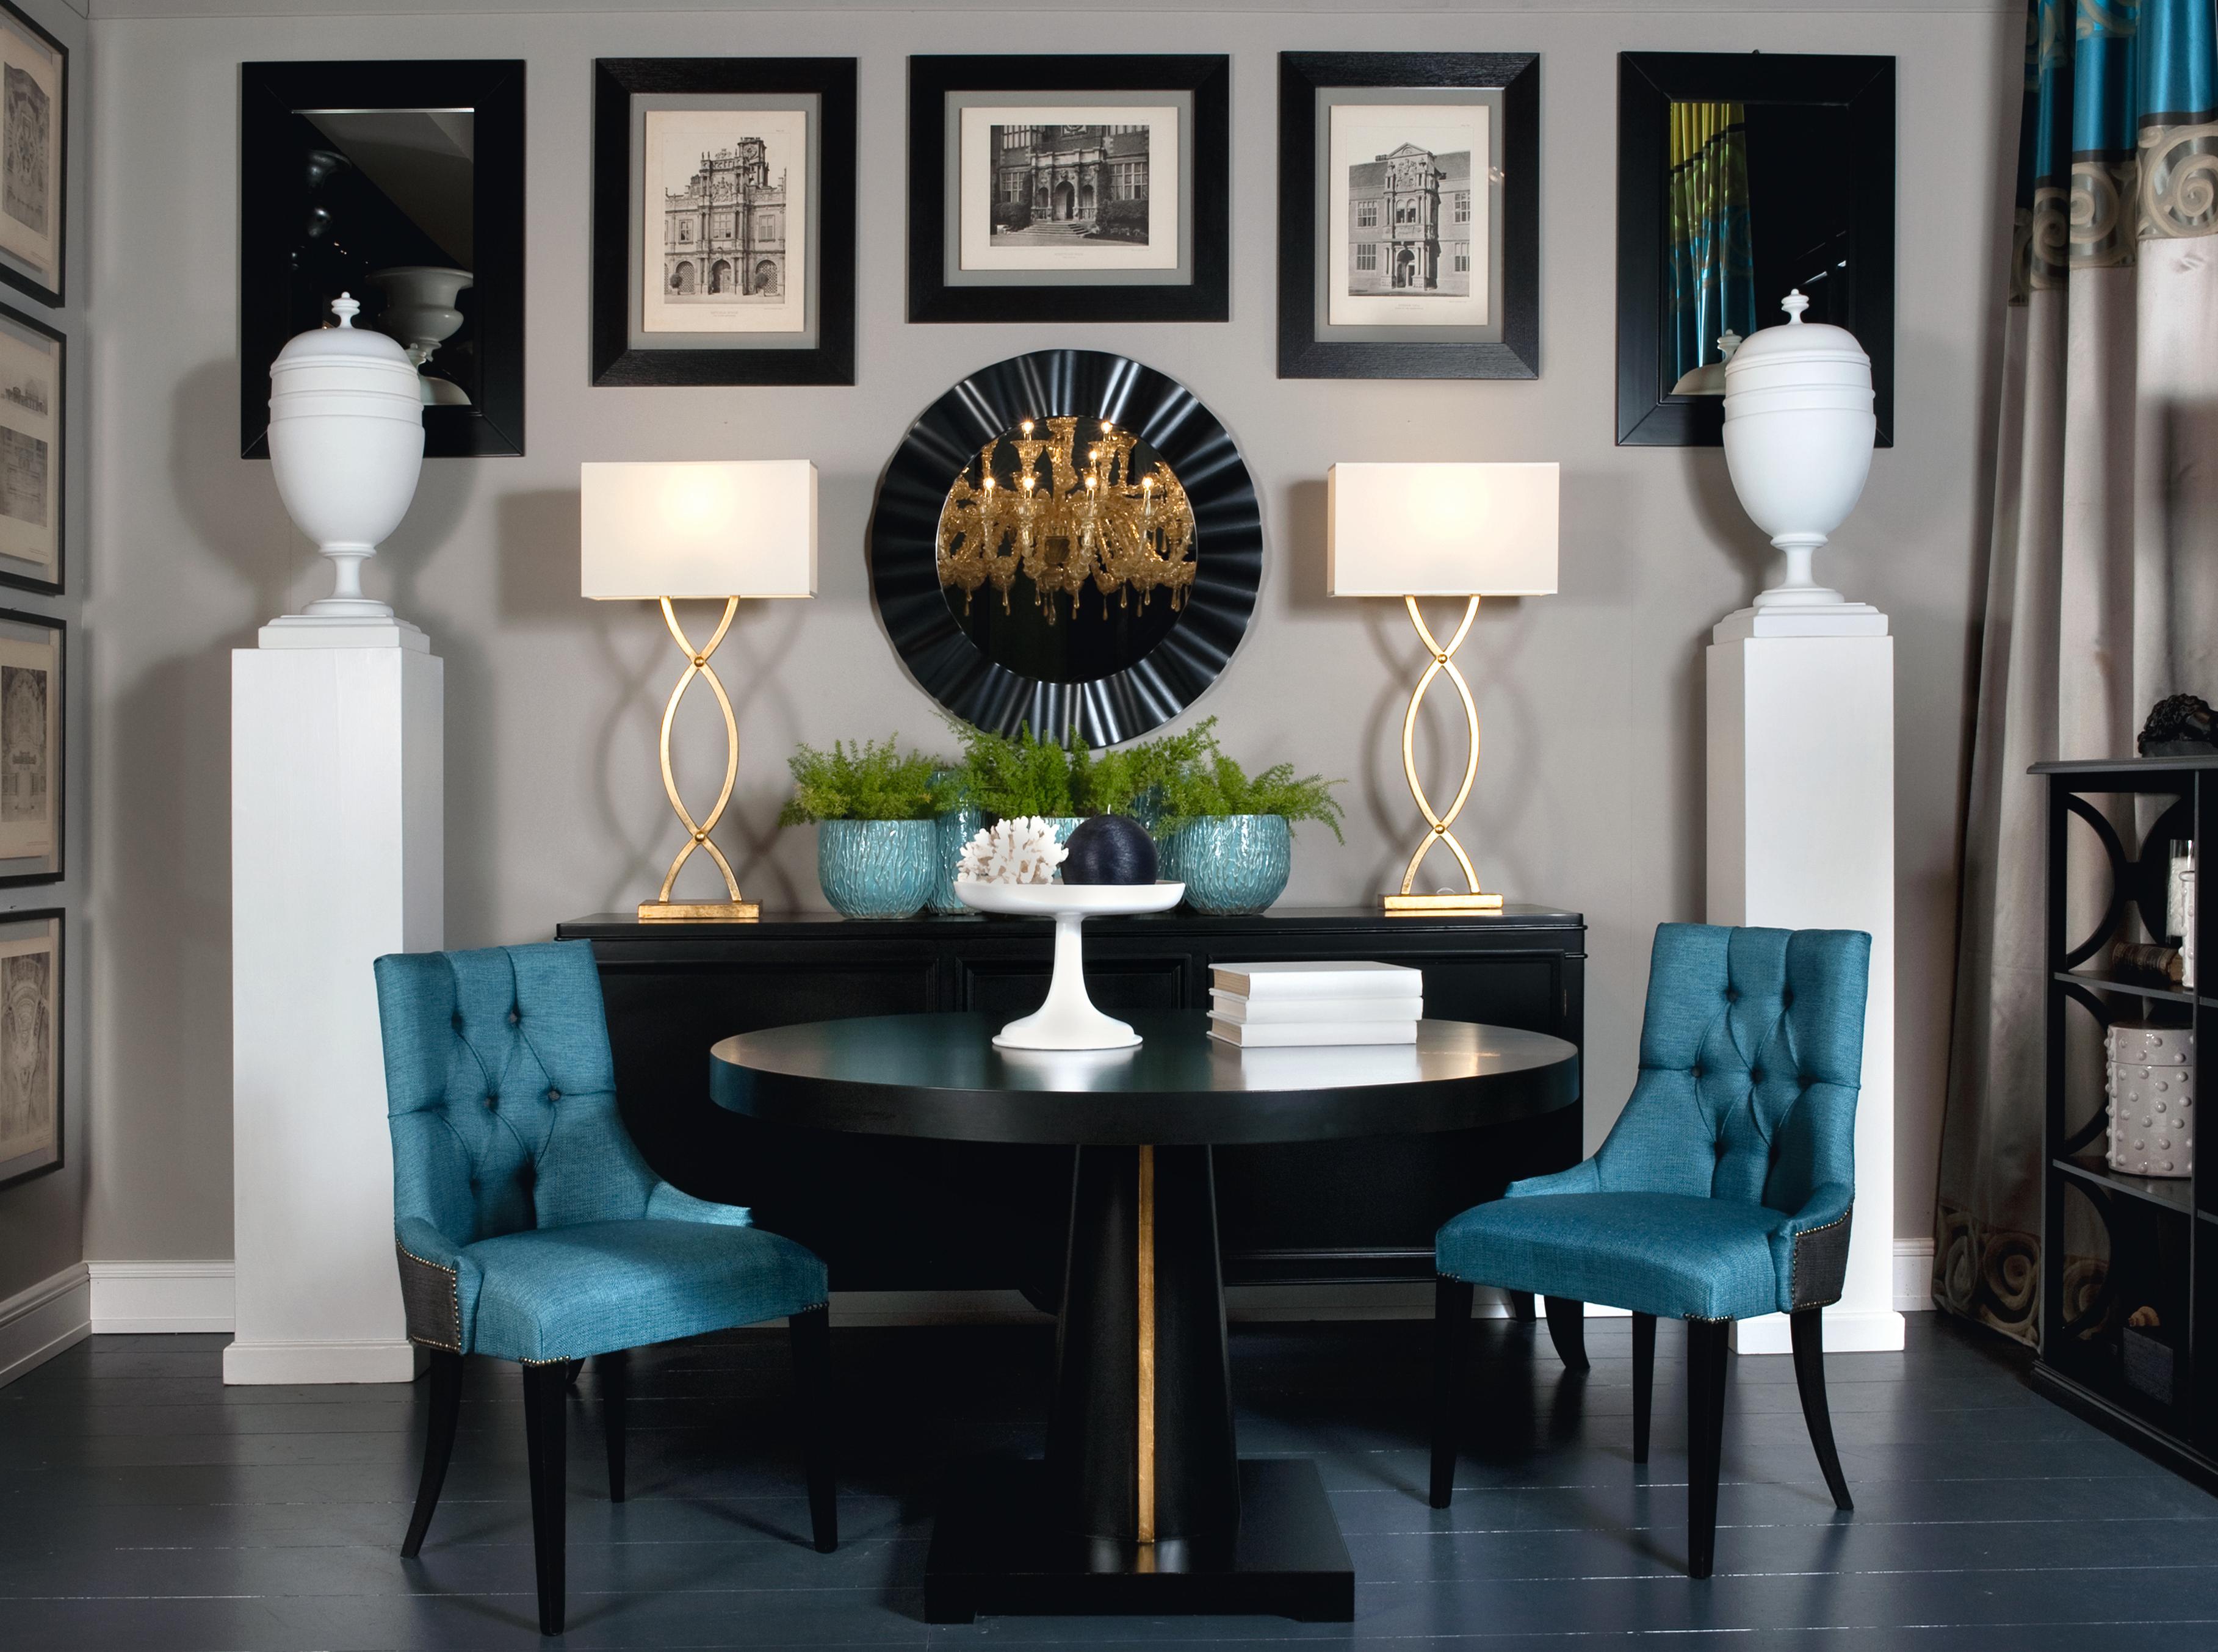 Designed by IC, this round Art Deco inspired dining table is impeccably crafted by Italian artisans.
The piece has a strong architectural appeal and a slick of gold leaf detailing adds an appropriate amount of glamour.
The table comes available in